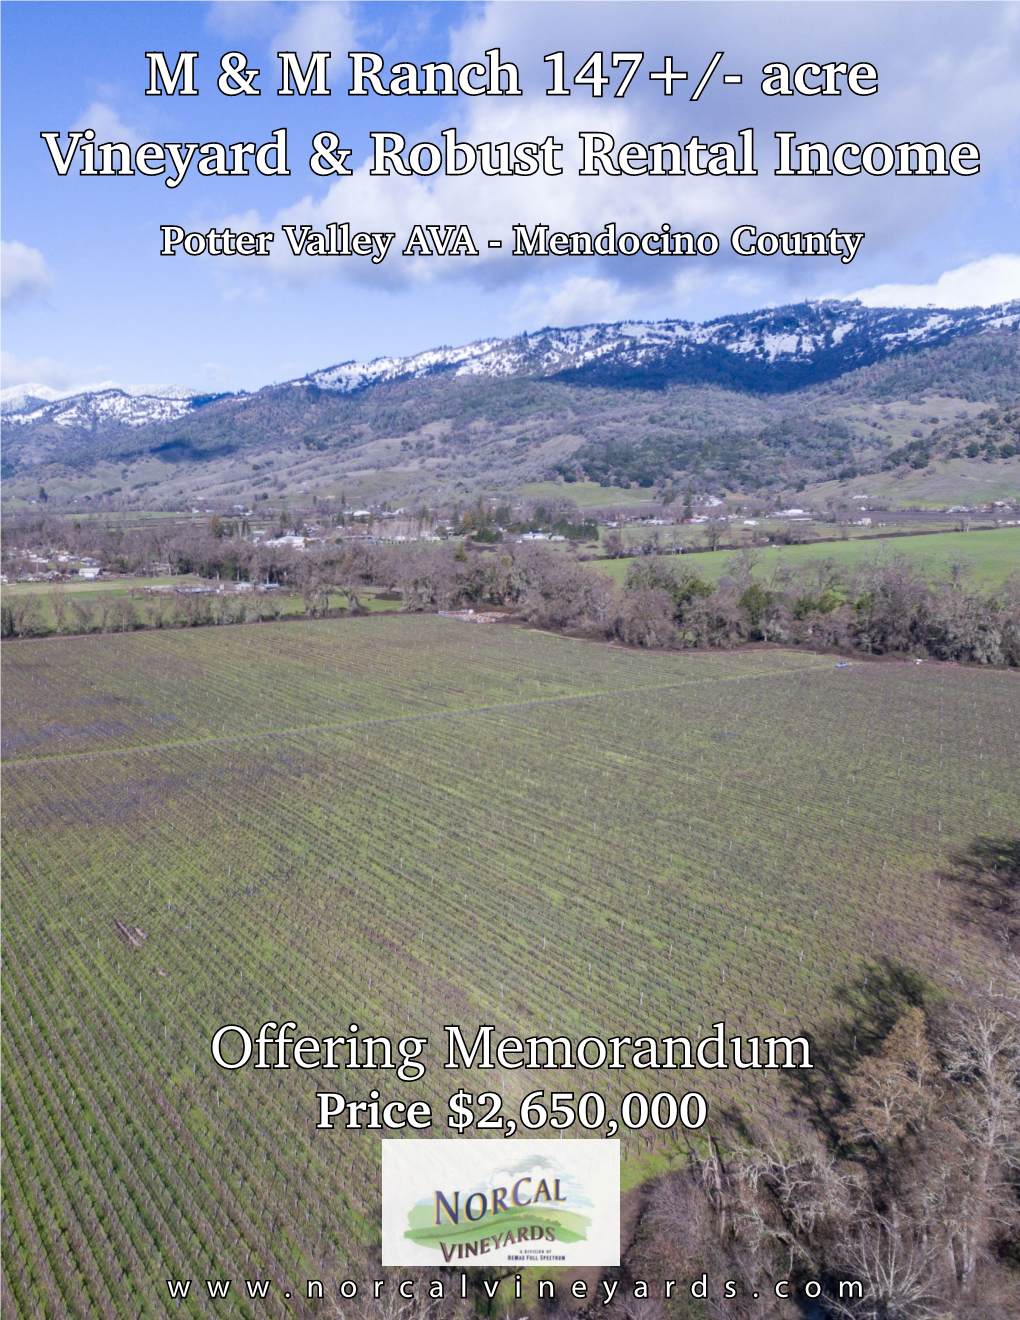 M & M Ranch 147+/- Acre Vineyard & Robust Rental Income